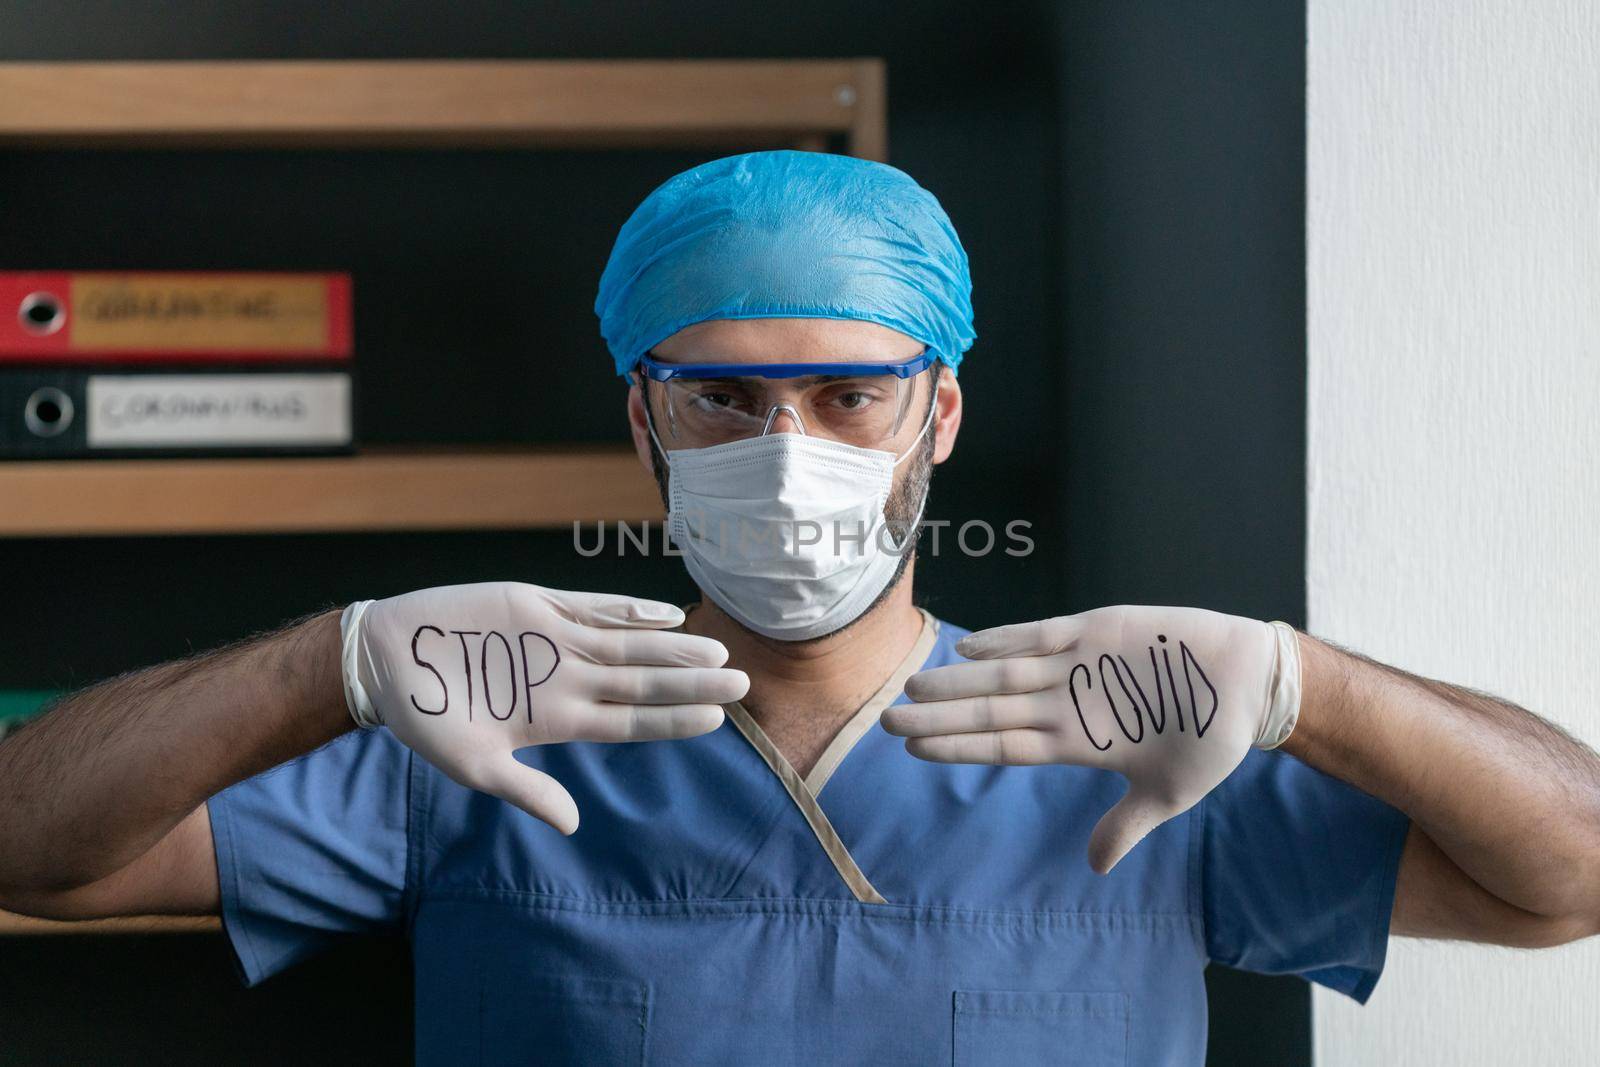 Male Doctor Shows Slogan To Stop Covid Virus Written With Black Marker On His White Gloves, Man In Blue Medical Uniform wants To Stop Covid-19 Or Coronavirus Epidemic, Quarantine Concept